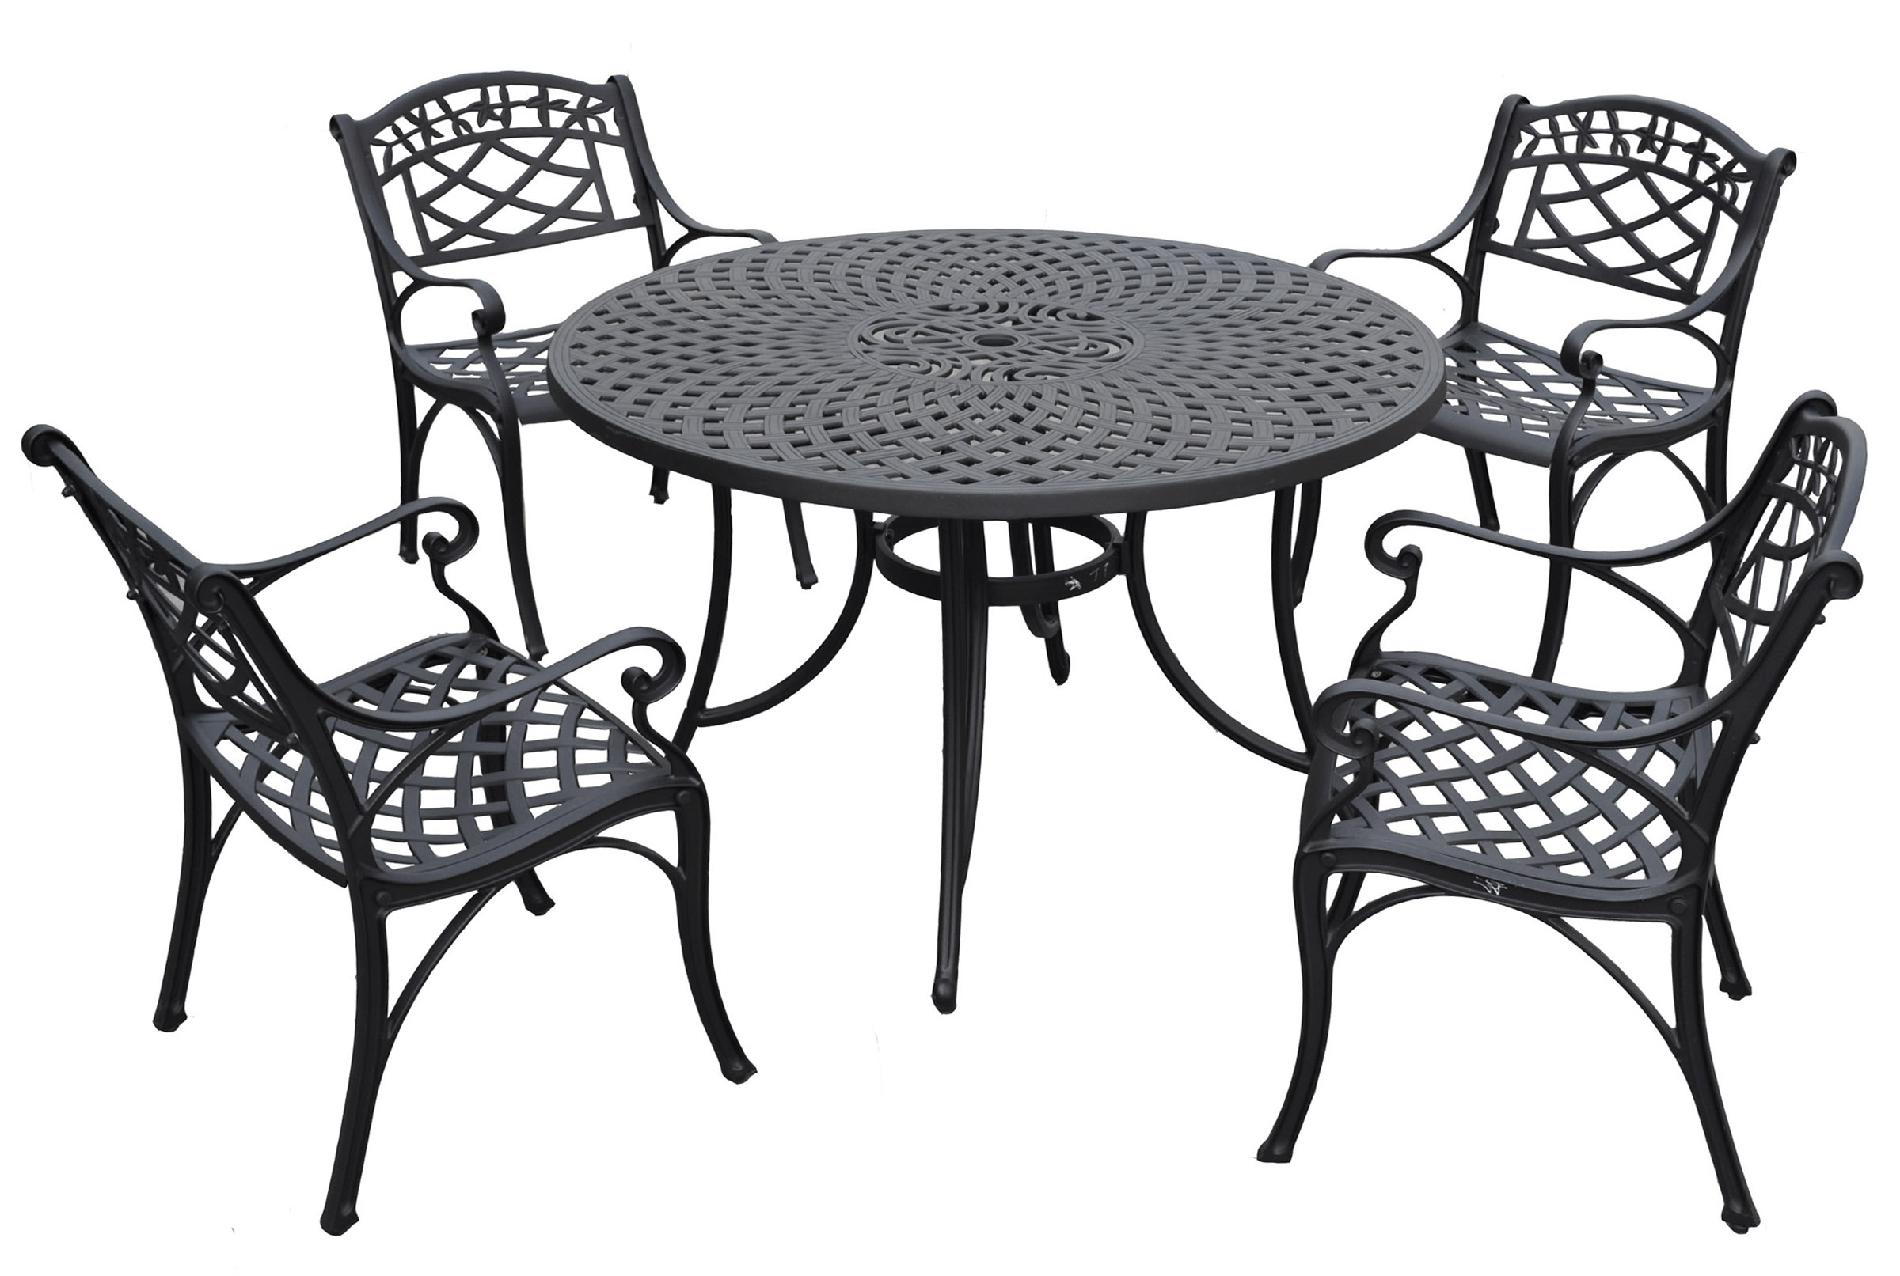 Crosley Outdoor Sedona Five Piece Cast Aluminum Outdoor Dining Set with Arm Chairs